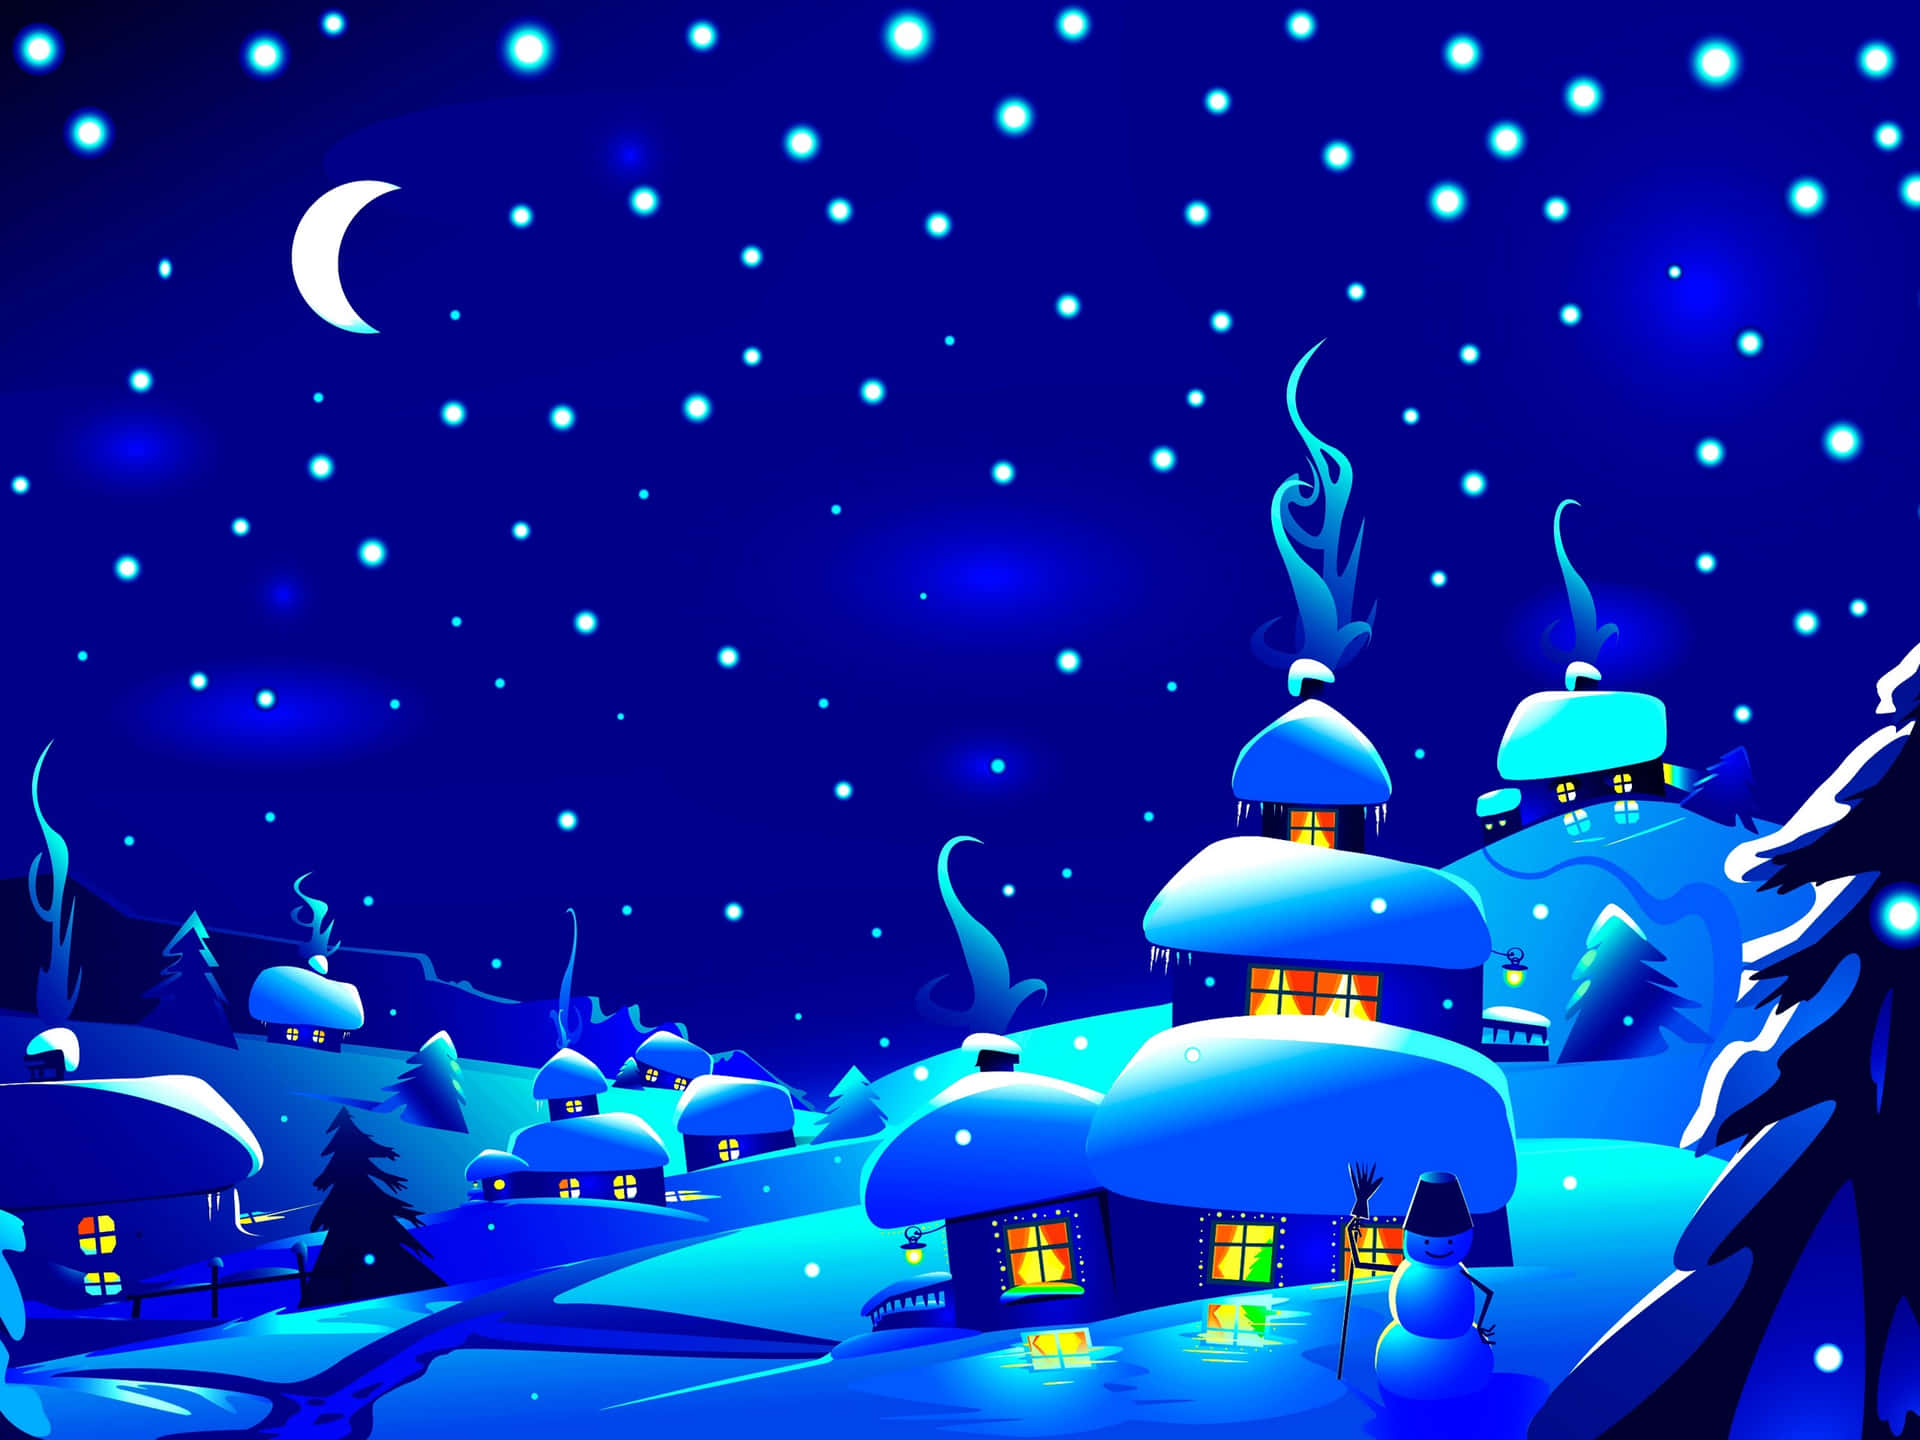 A Snowy Winter Scene With Snow And Snowmen Wallpaper